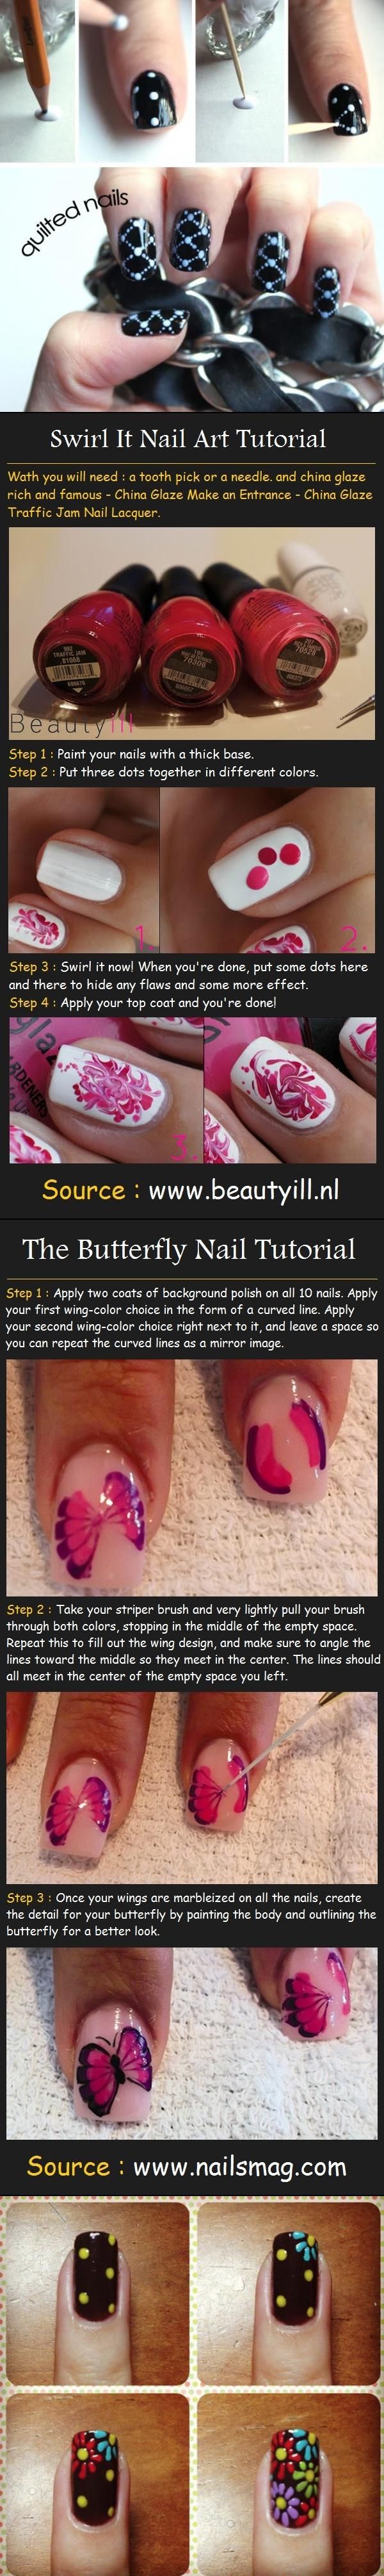 Lots of Nail Art Designs I love!!!  ♥♥♥  These are for the beginner with n...